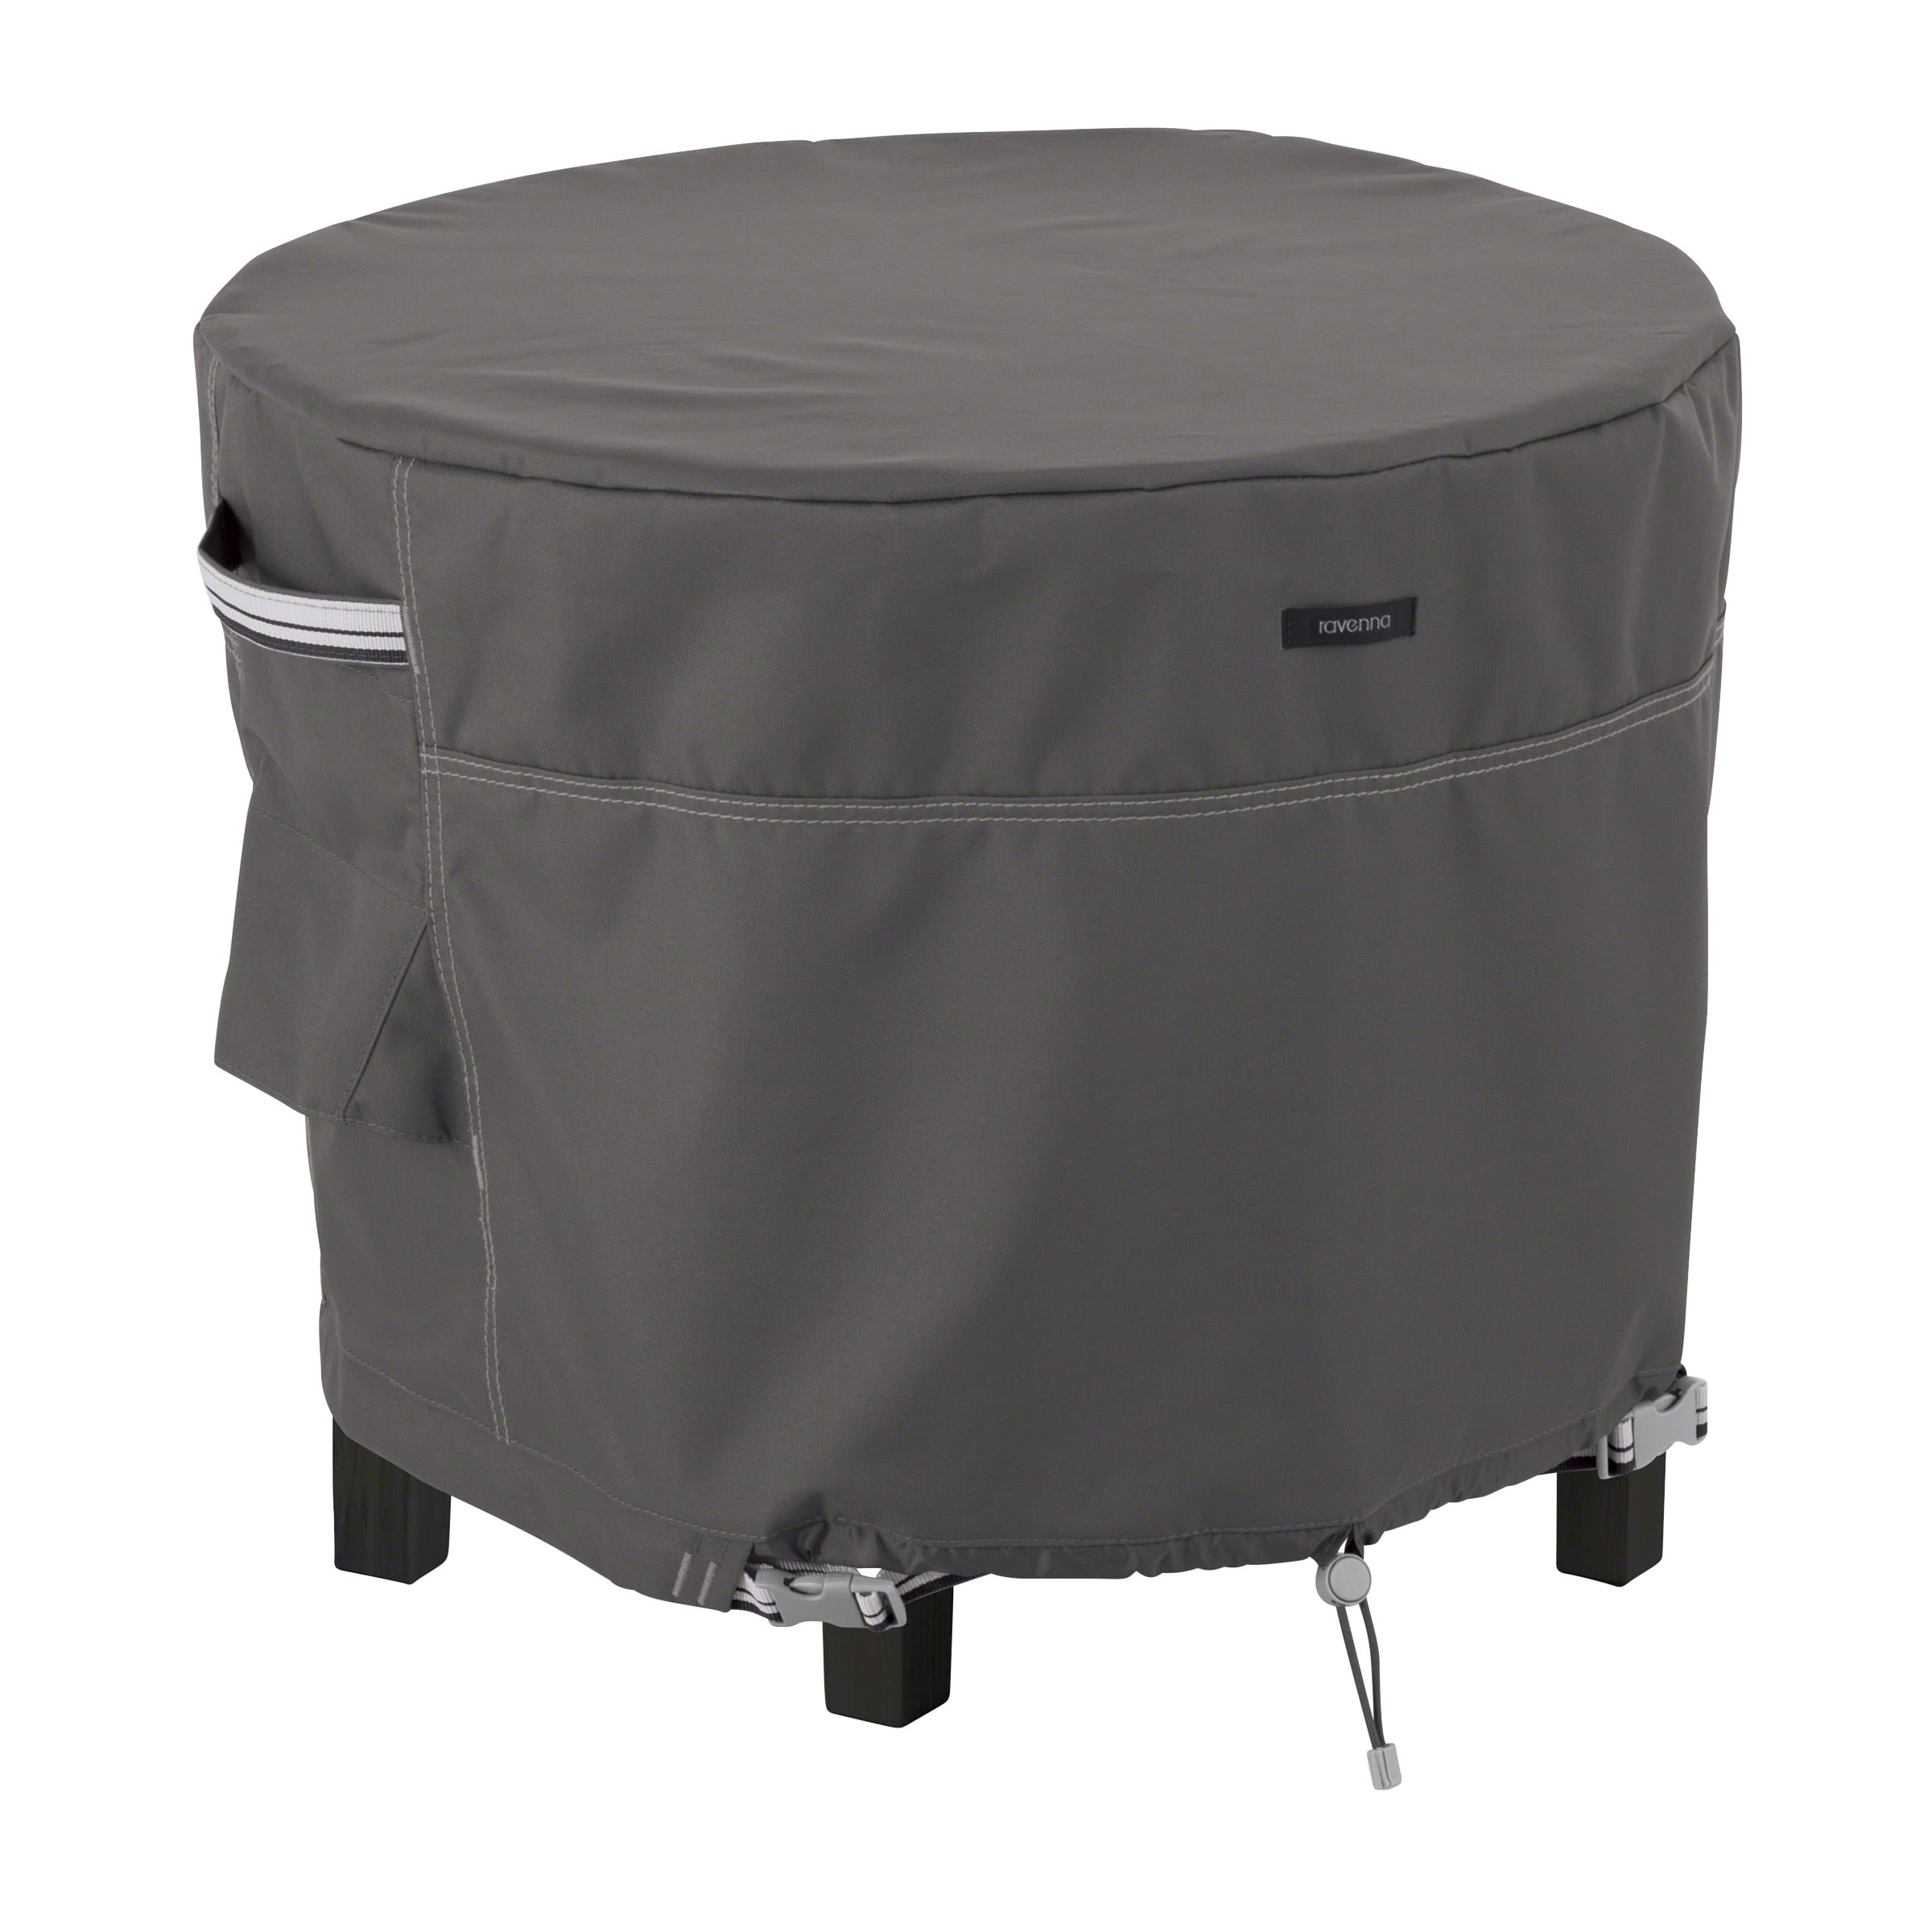 Details about   Classic Accessories Ravenna Water-Resistant 24 Inch Round Patio Ottoman/Table Co 